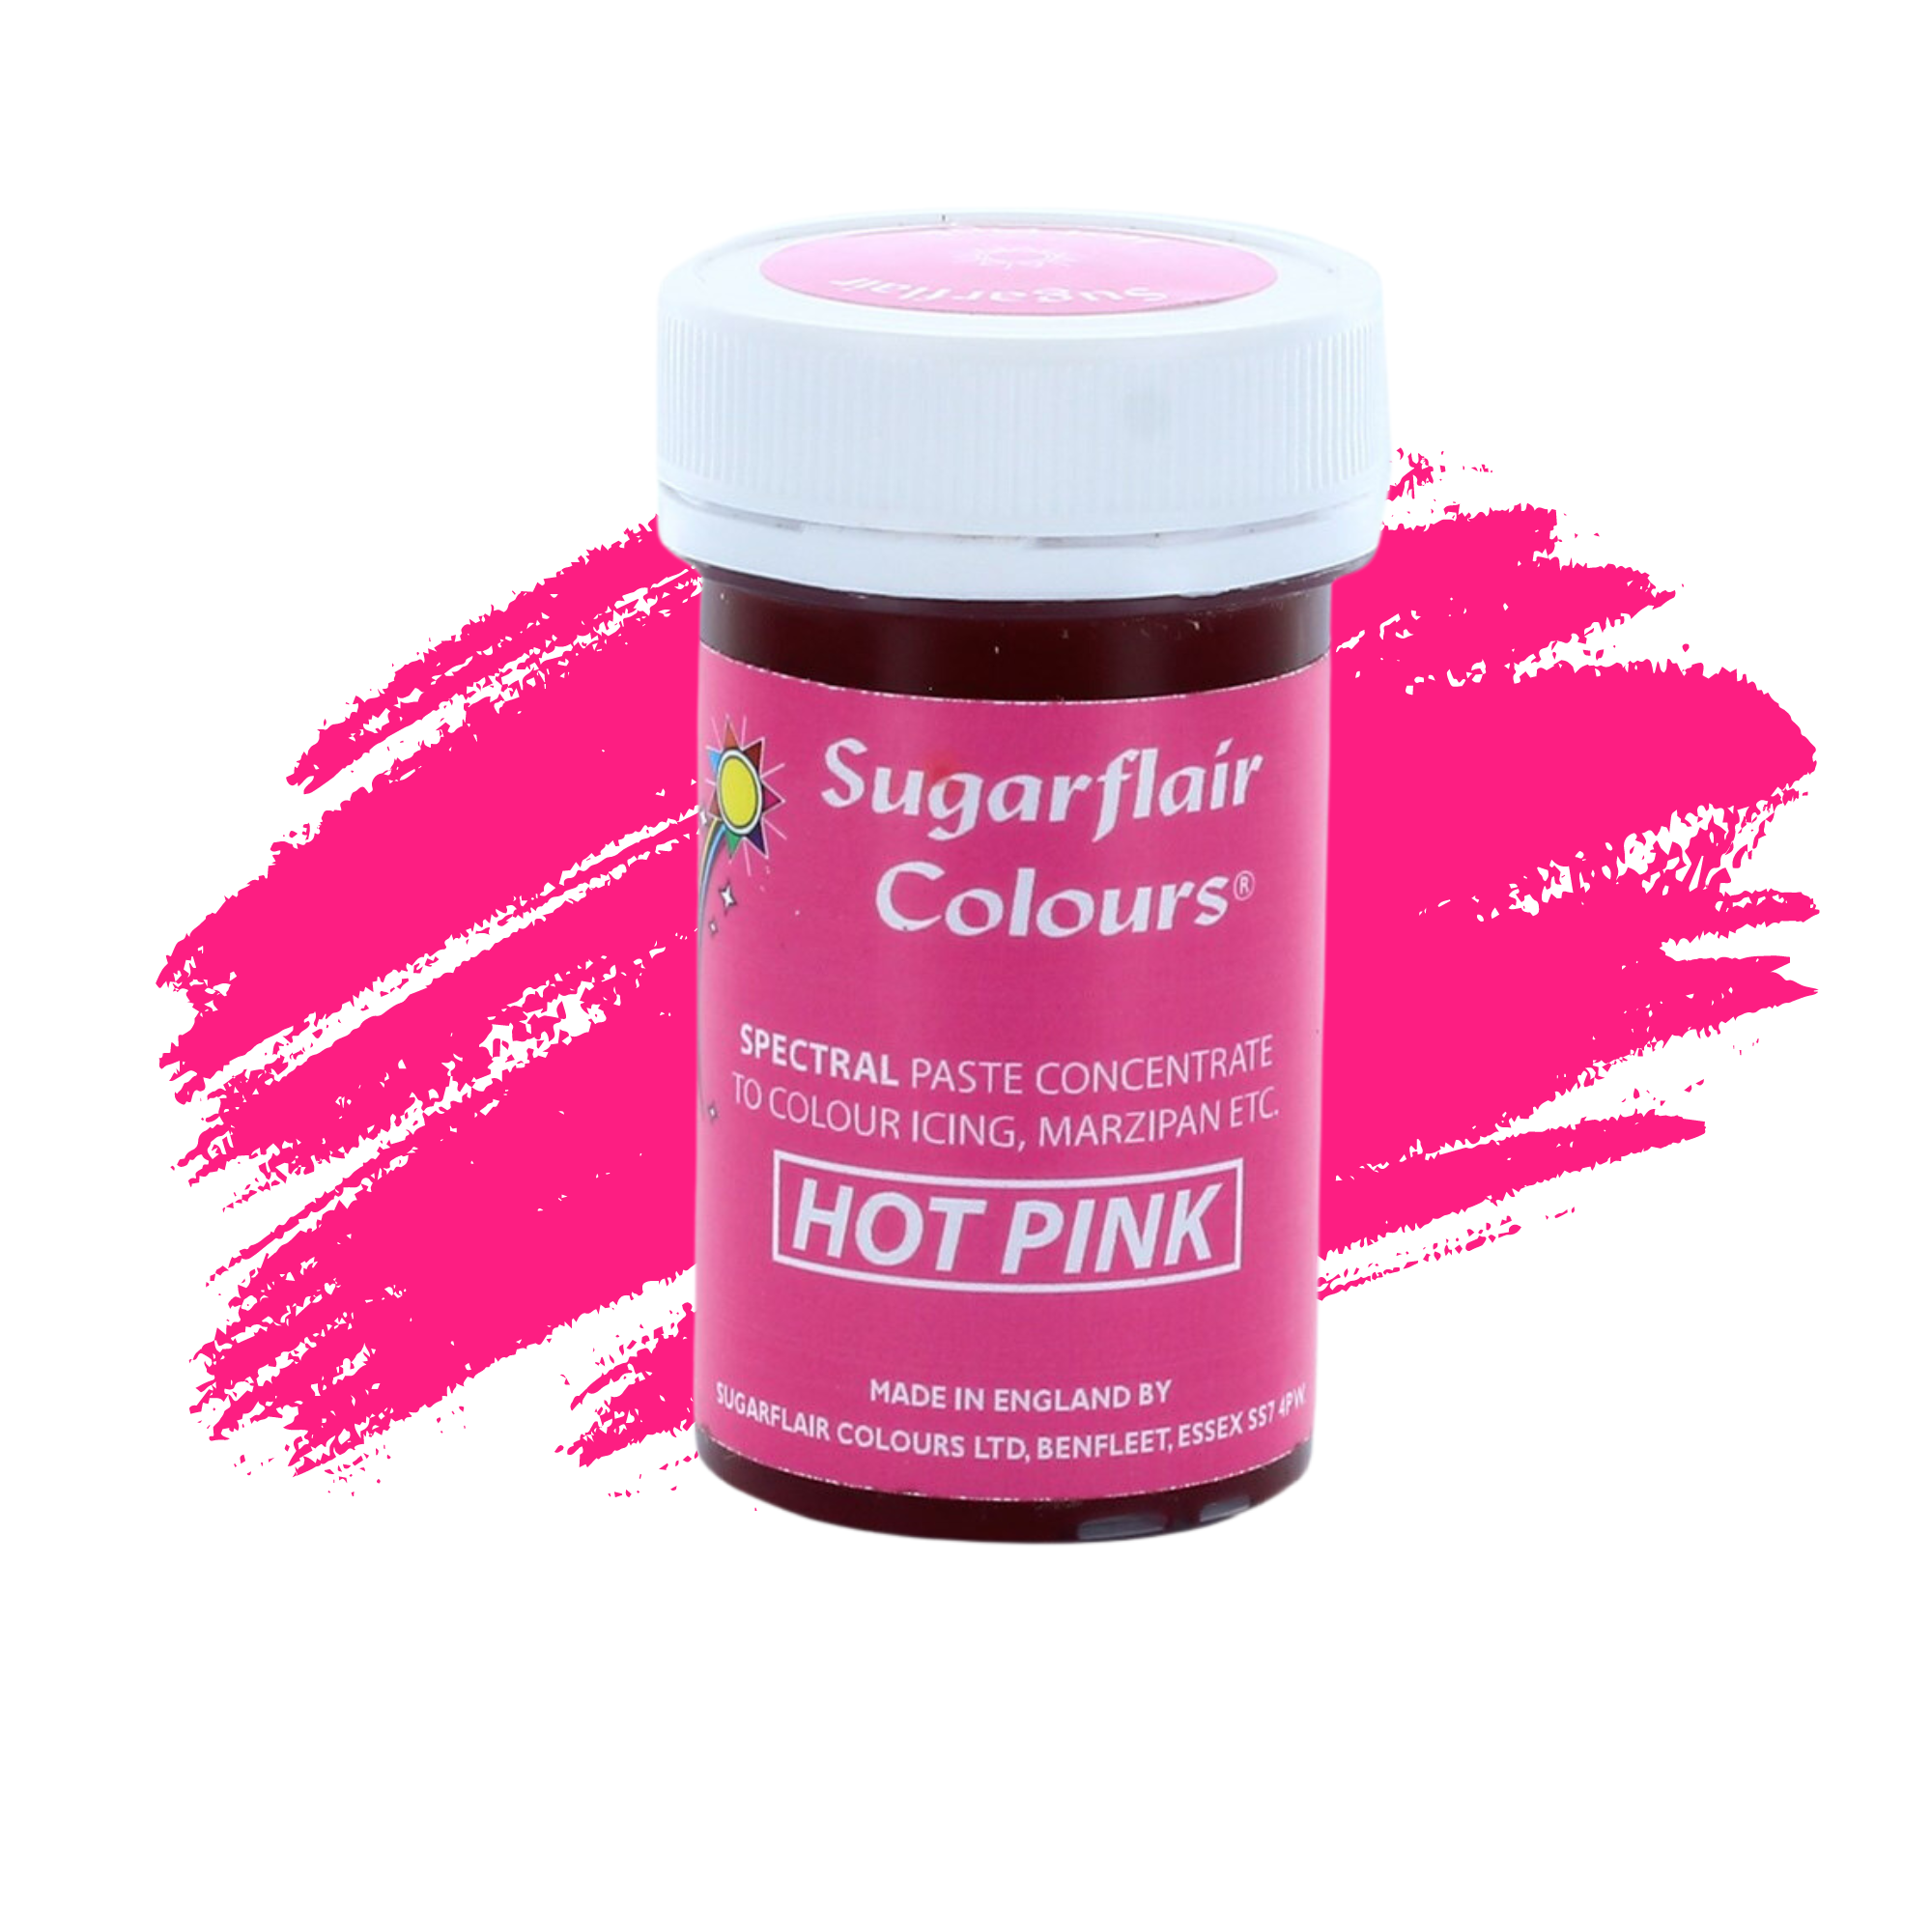 Sugarflair Paste Colours Concentrated Food Colouring - Spectral Hot Pink - 25g